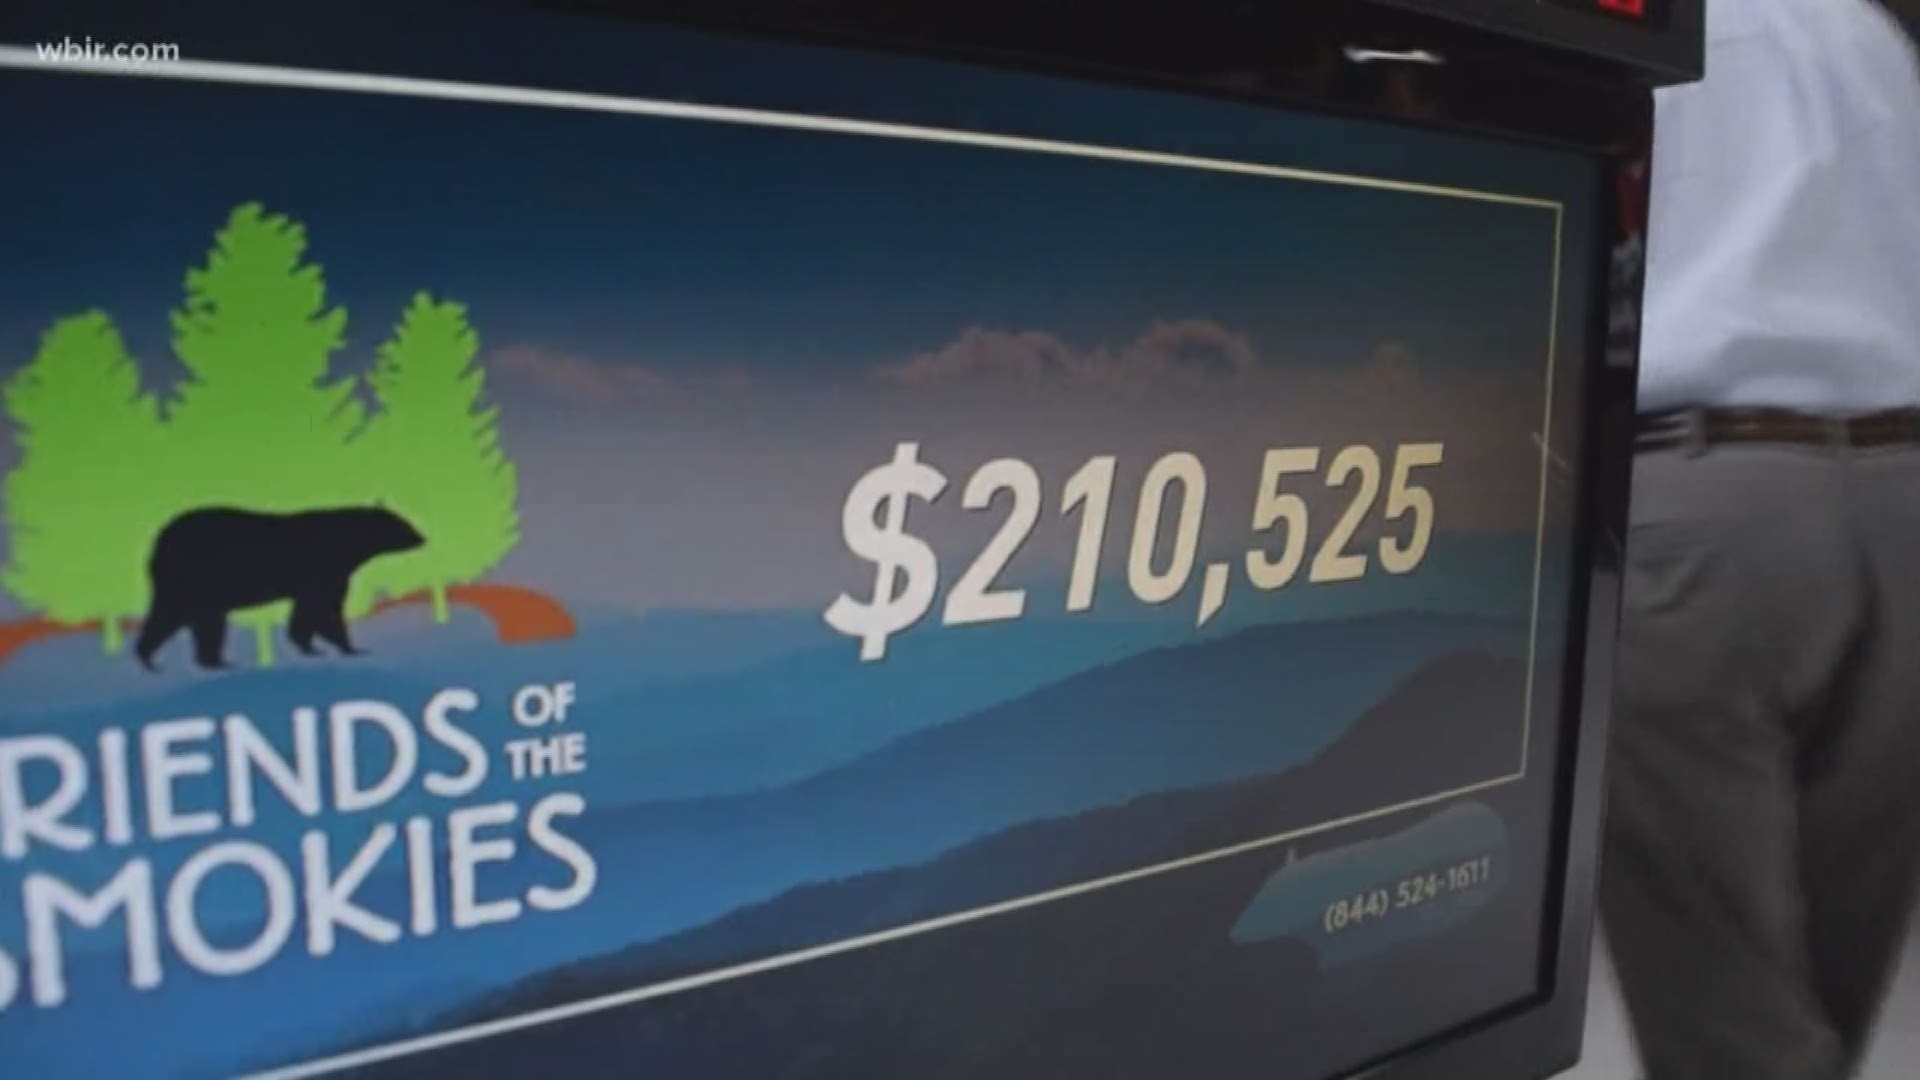 Tonight the annual 'Friends Across the Mountains' telethon broke the record for the amount of money raised for the great Smoky Mountains National Park.